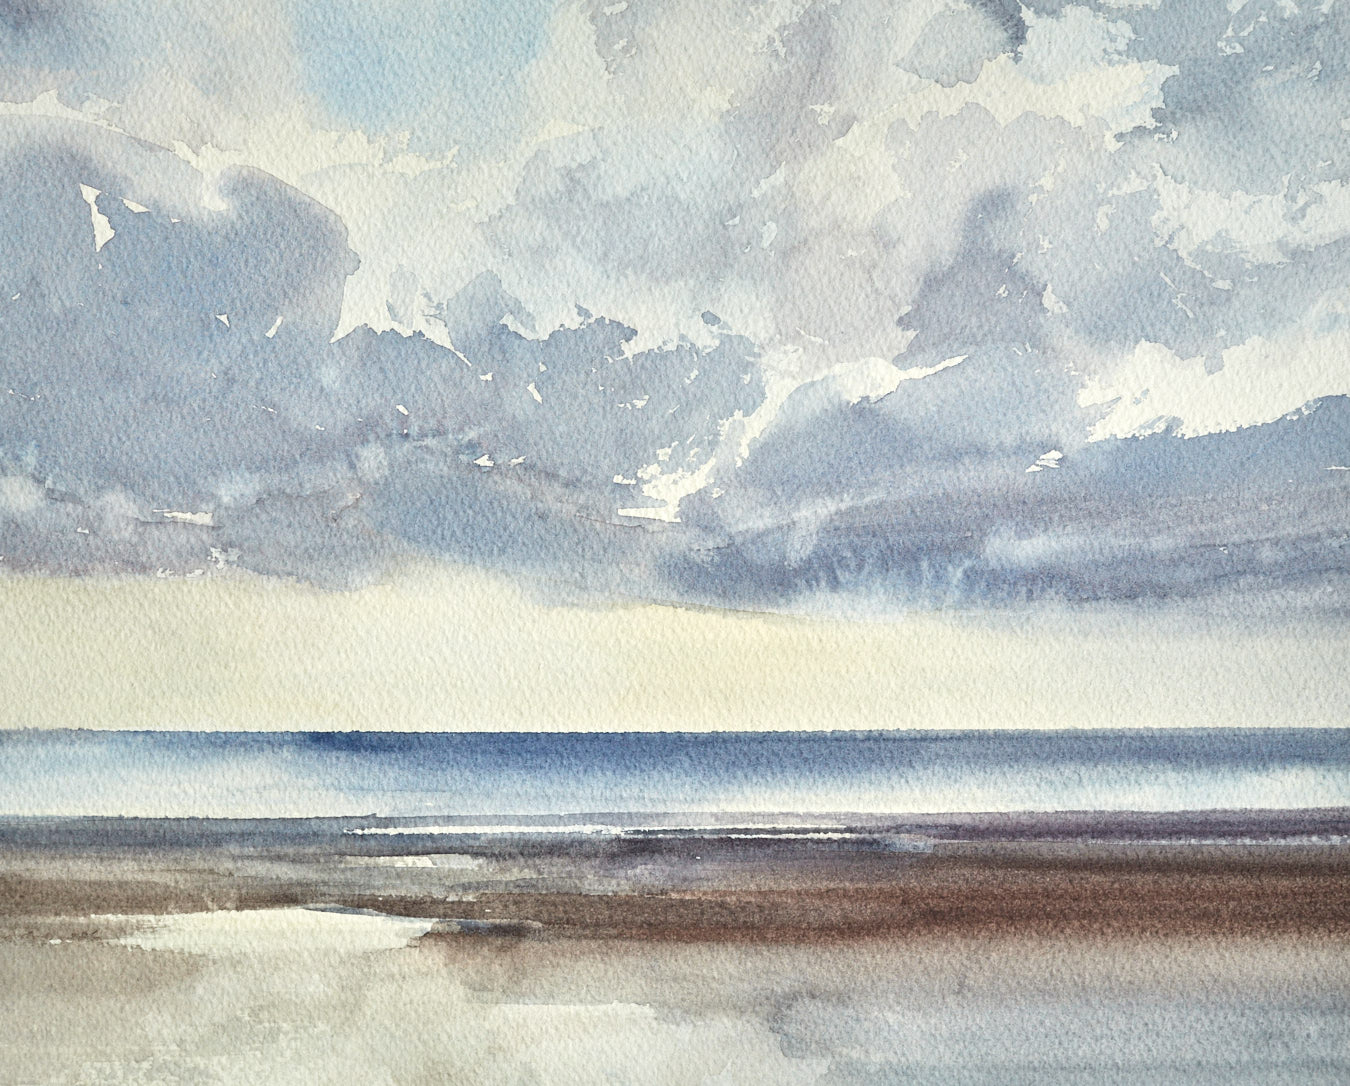 Large image of Sunset seashore, Lytham St Annes original watercolour painting by Timothy Gent